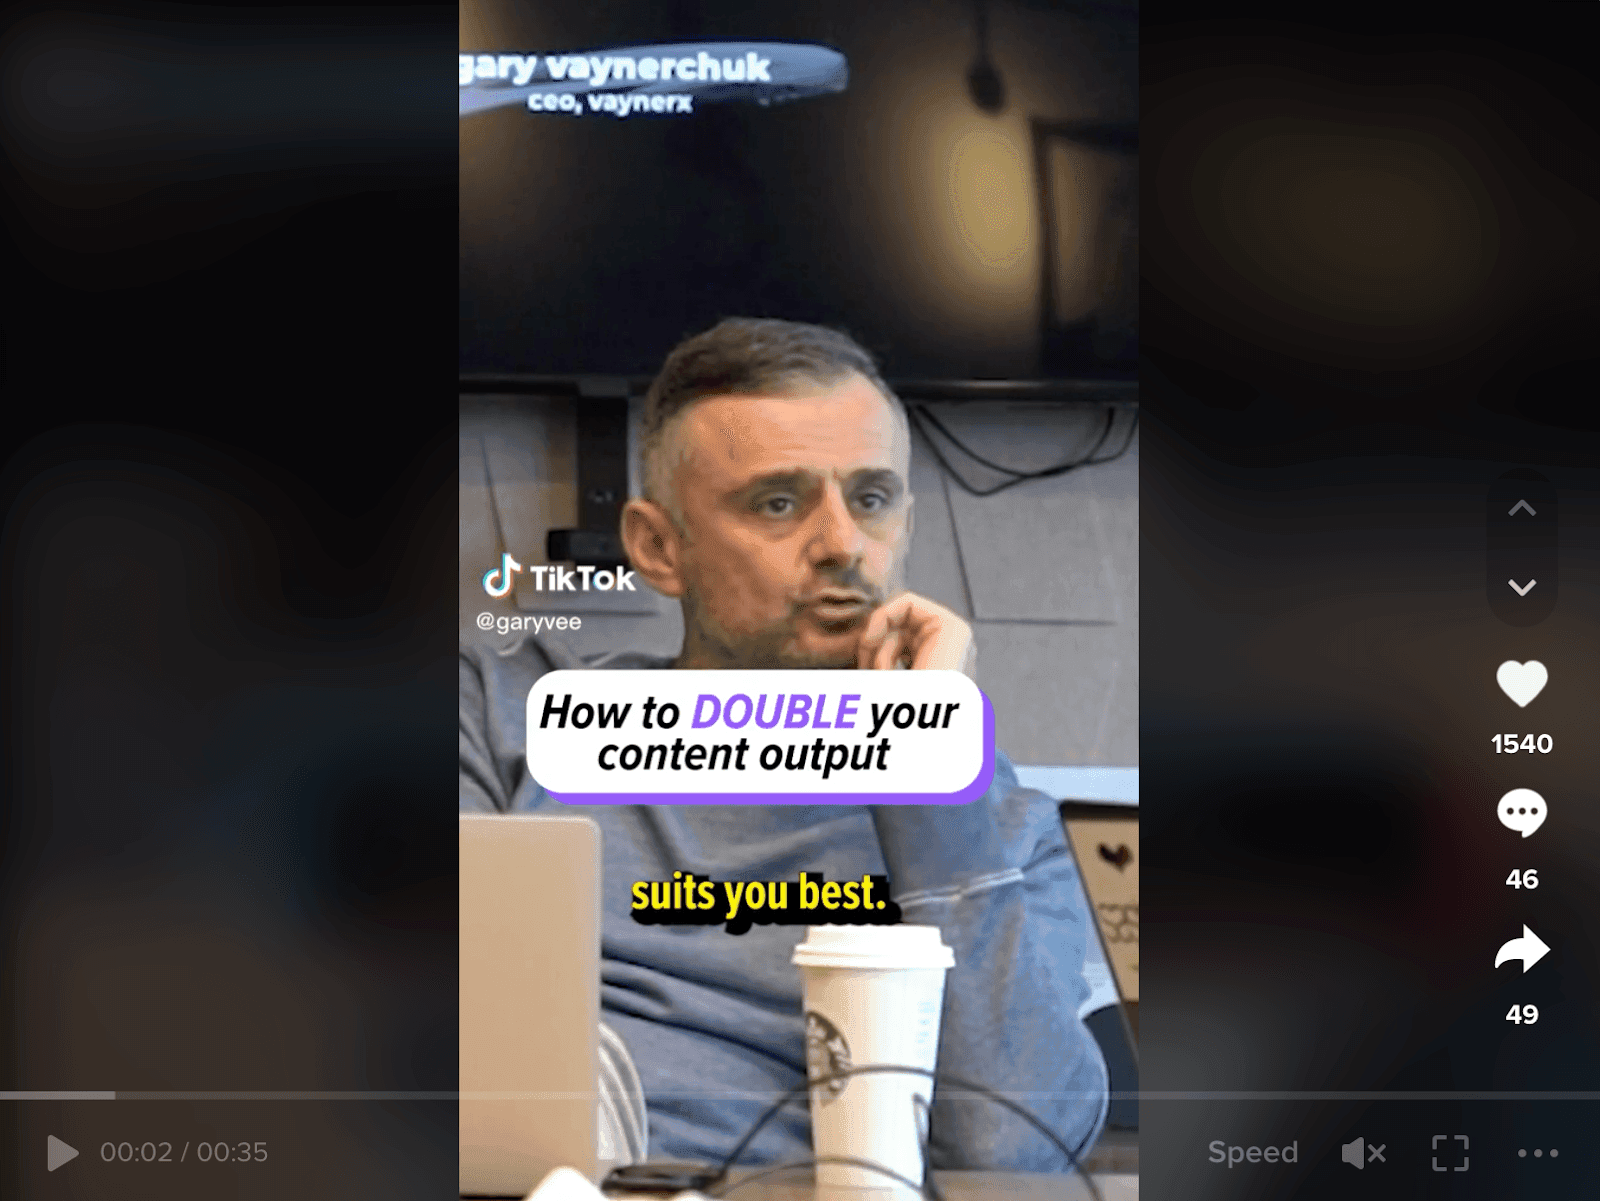 Screenshot of Gary Vaynerchuk's TikTok on "How to Double your content output". 